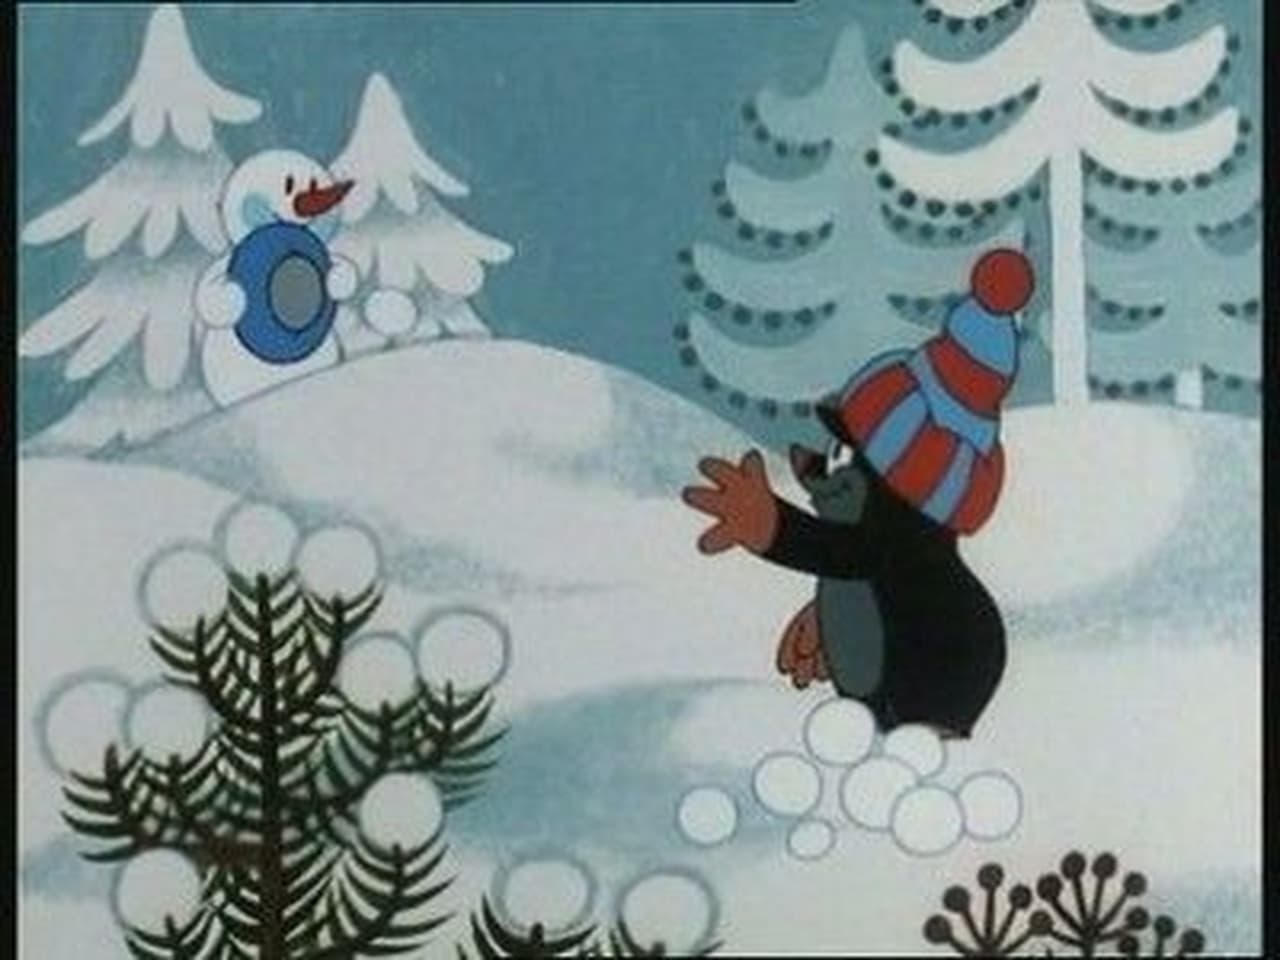 The Mole and the Snowman